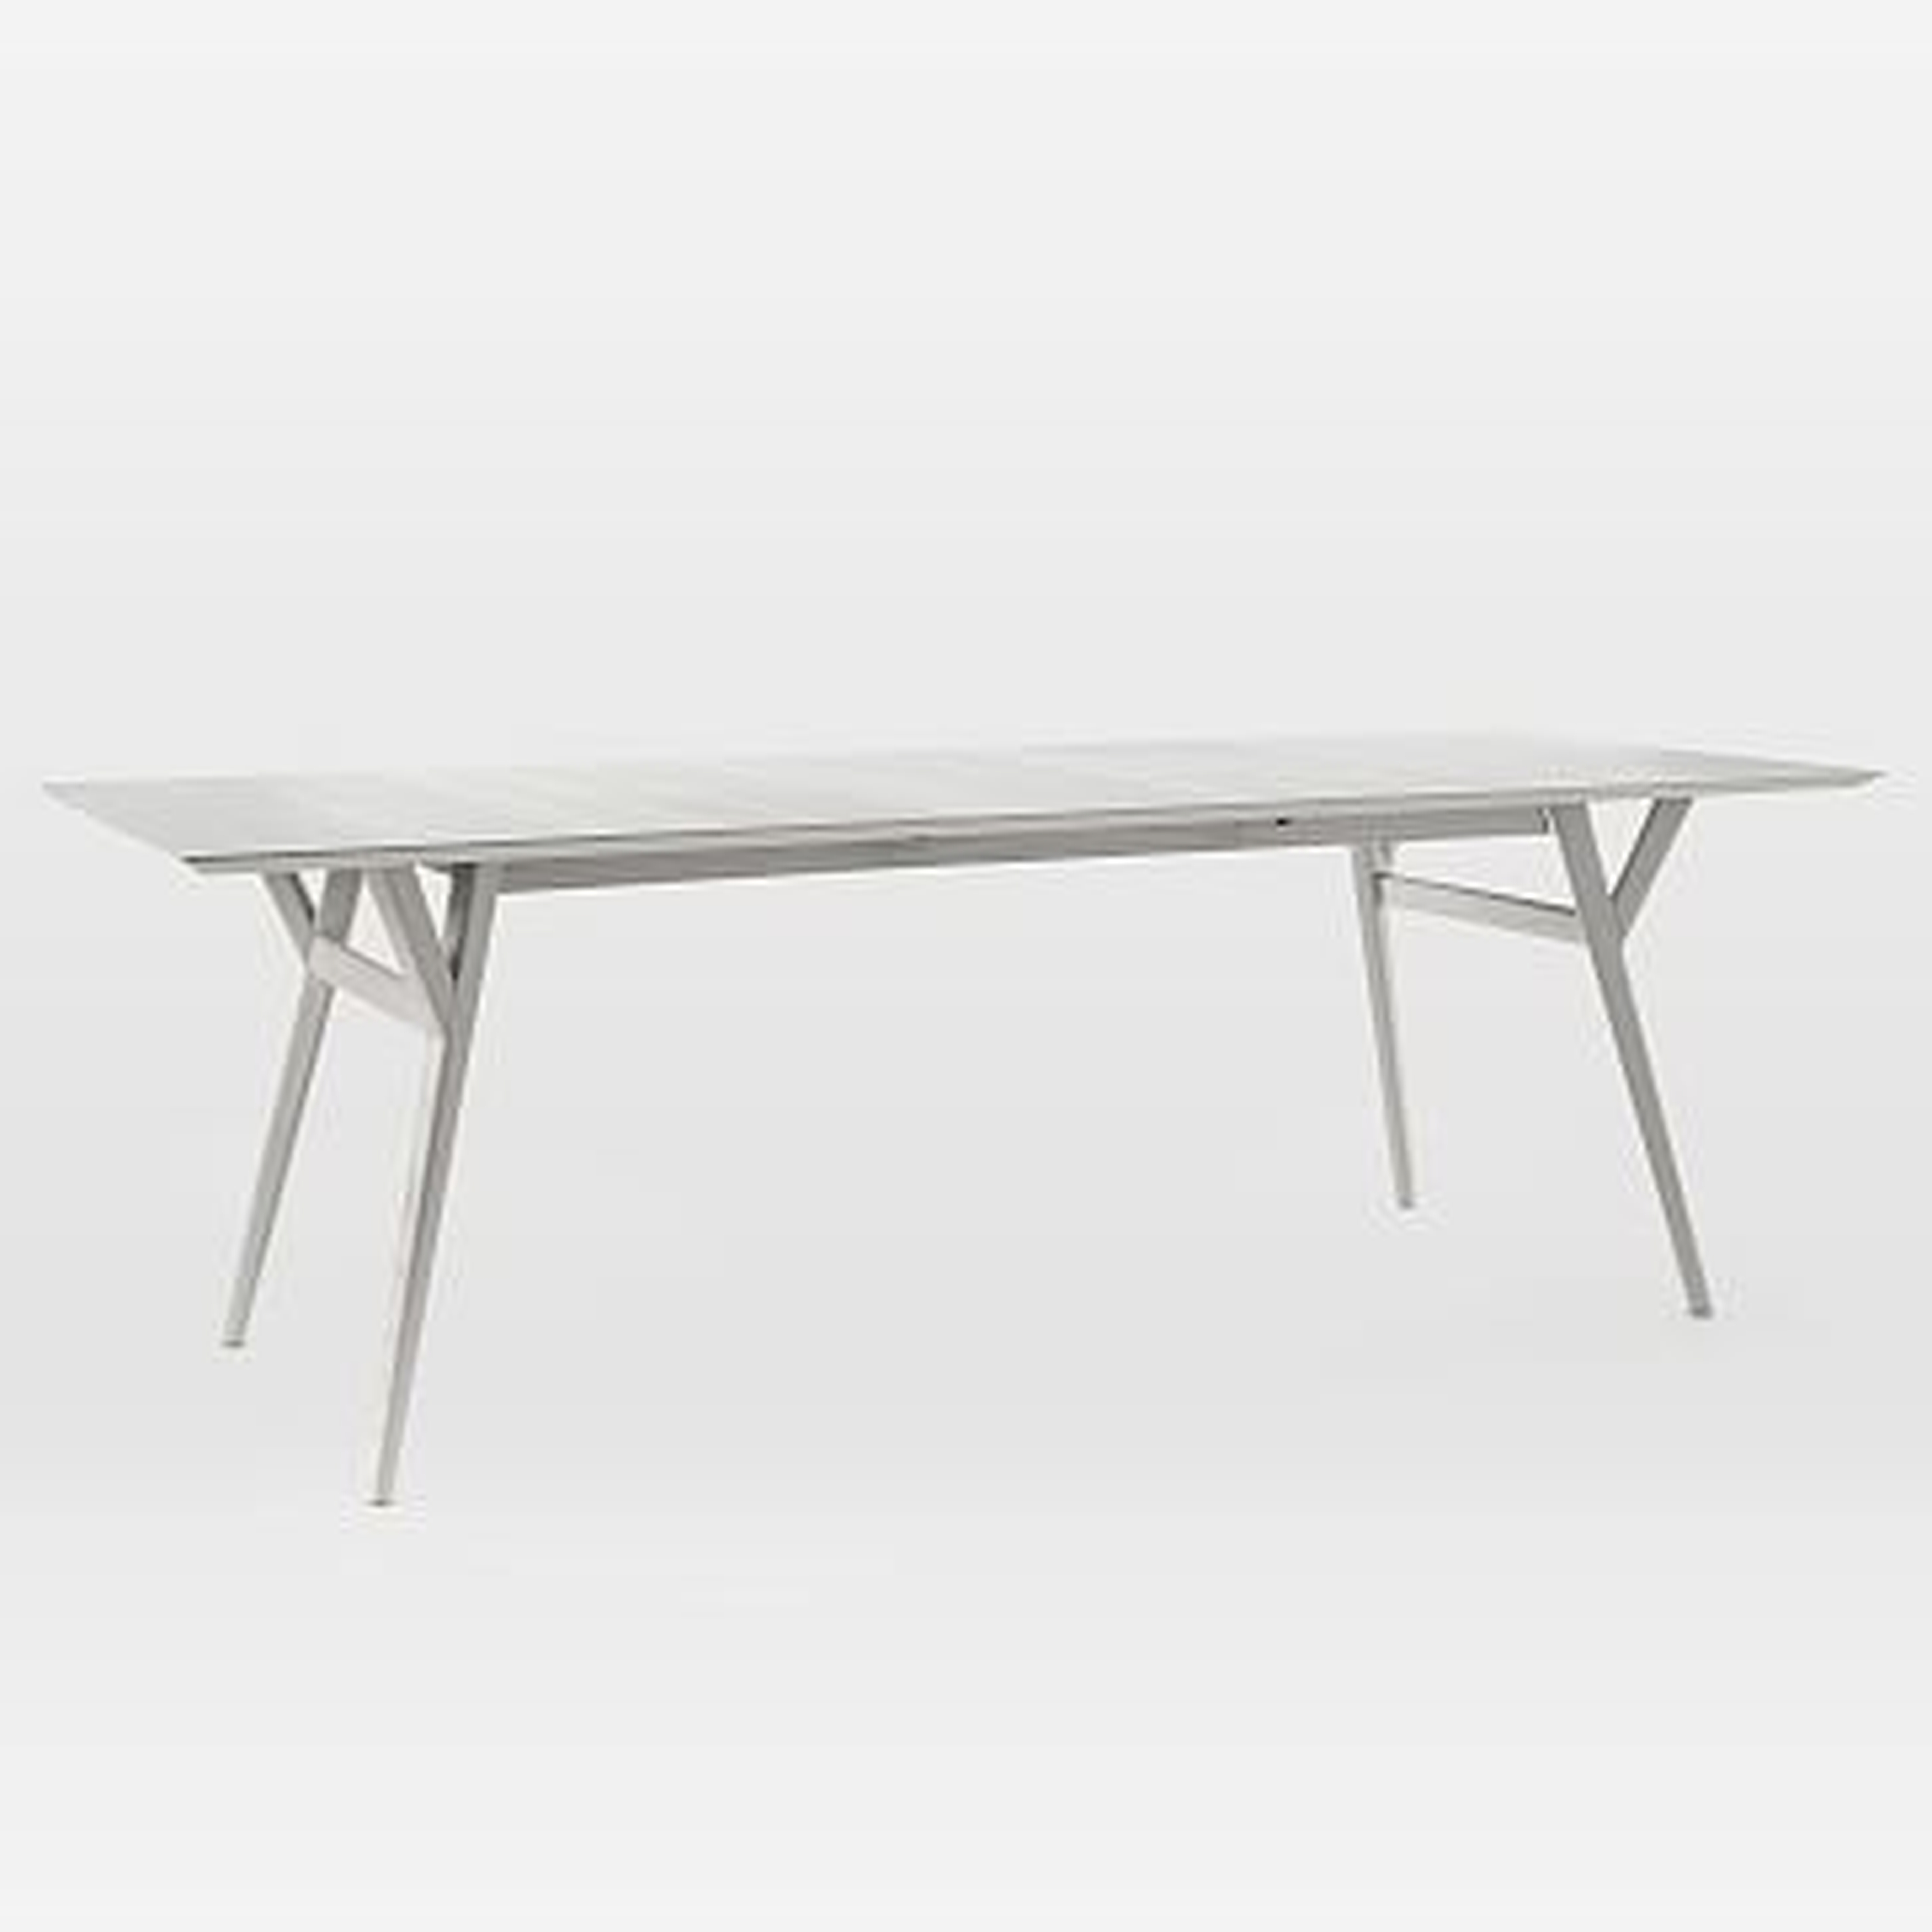 Mid-Century Expandable Dining Table, 72-92", Pebble - West Elm